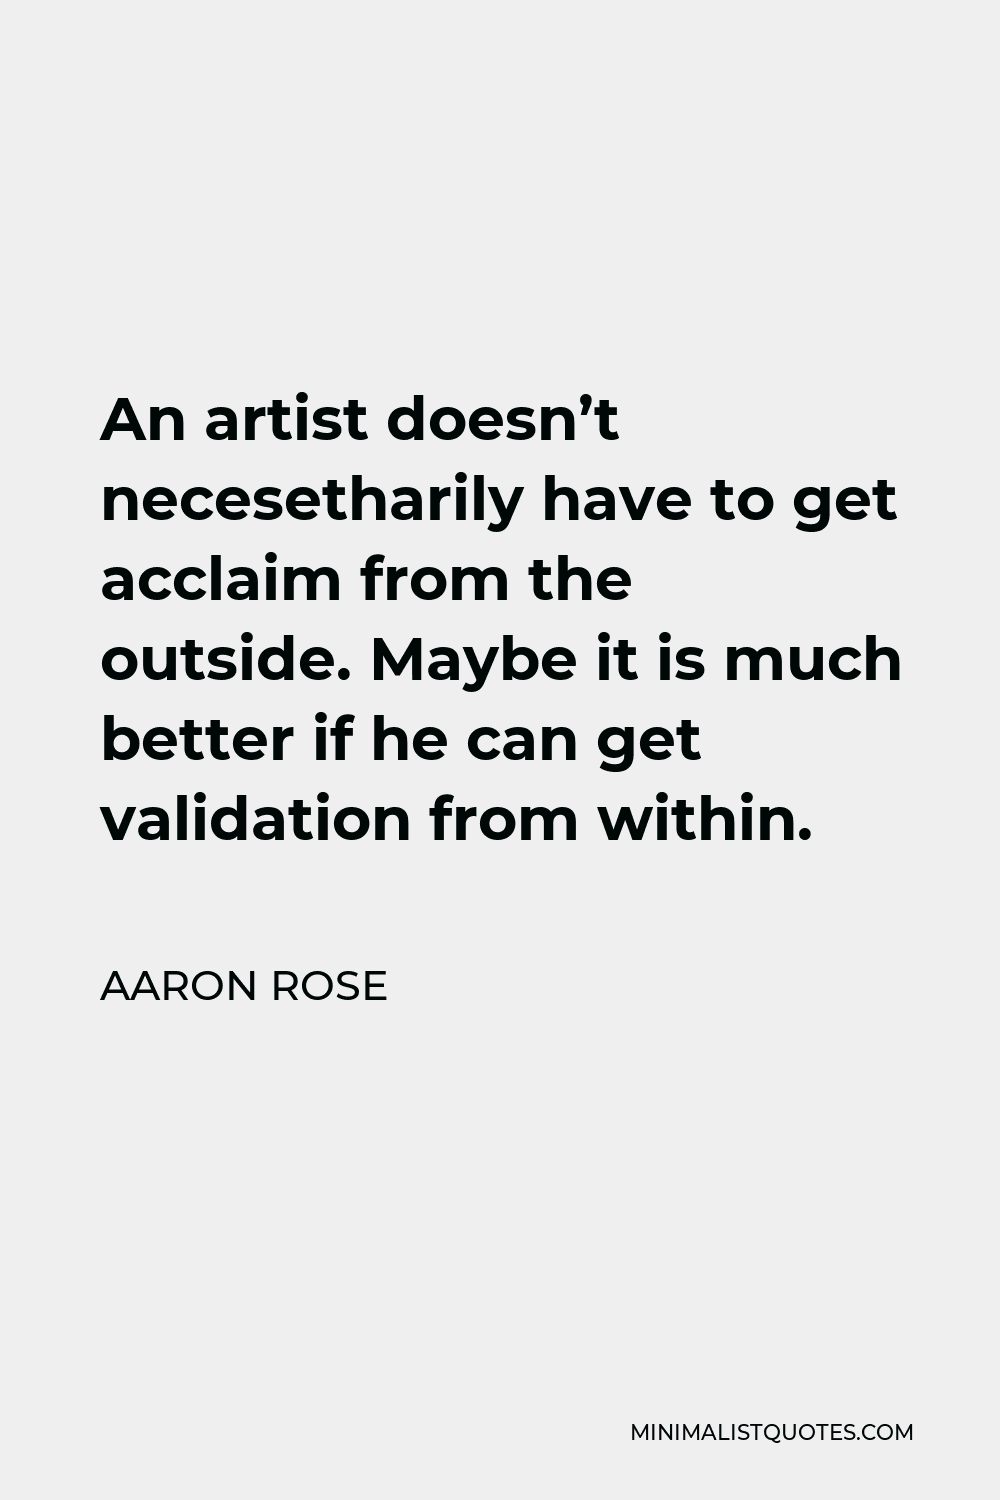 Aaron Rose Quote - An artist doesn’t necesetharily have to get acclaim from the outside. Maybe it is much better if he can get validation from within.